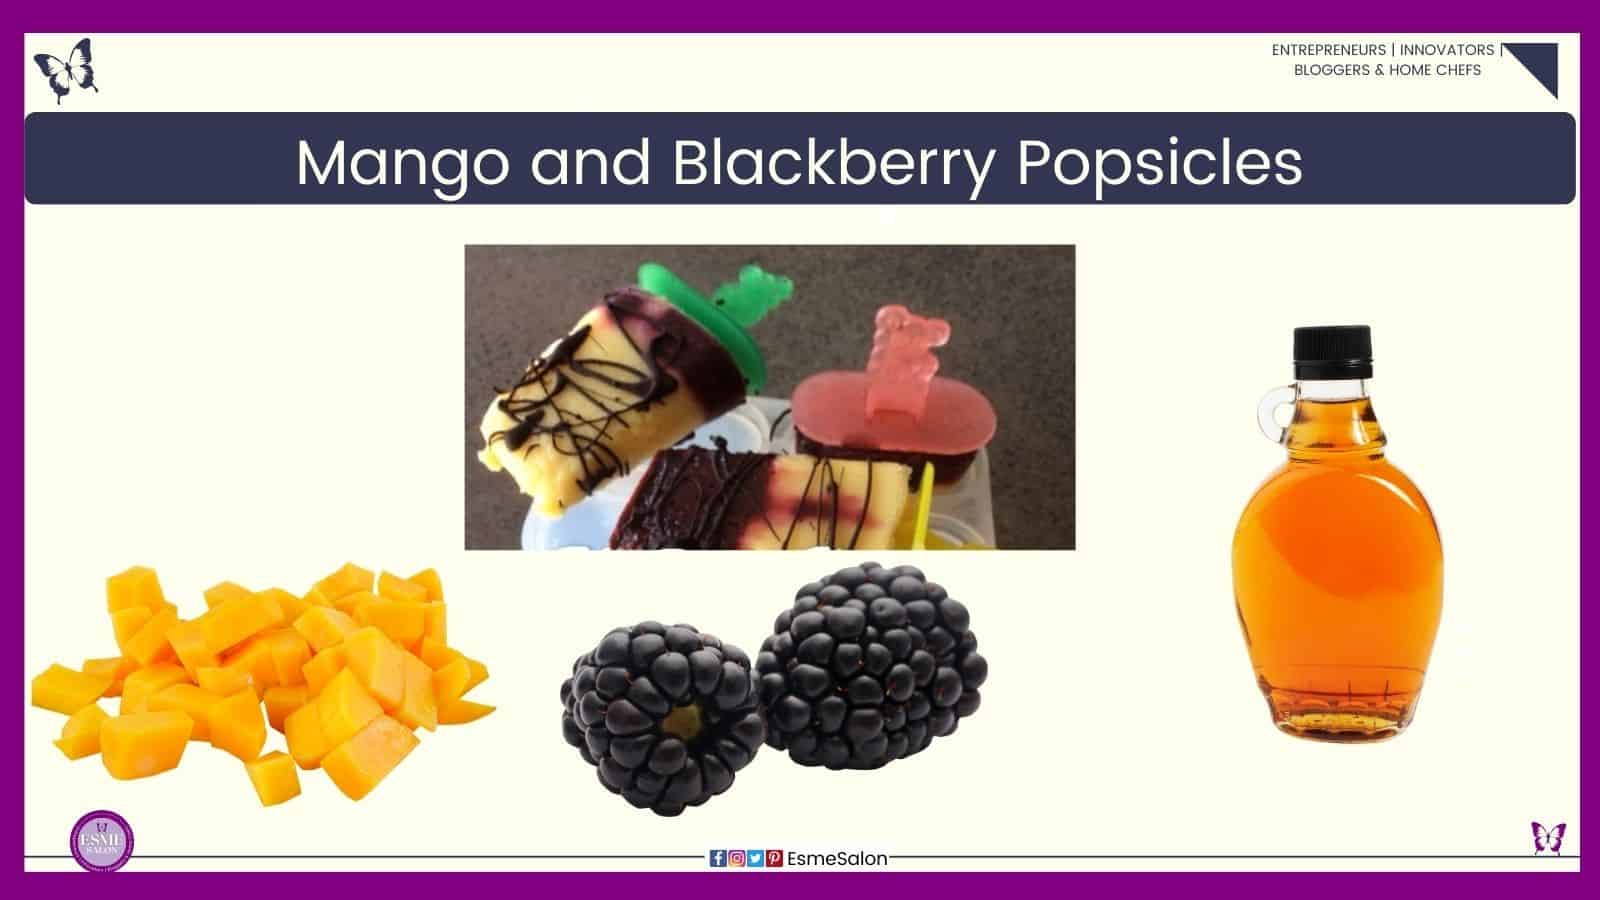 an image of 3 Mango and Blackberry Popsicles